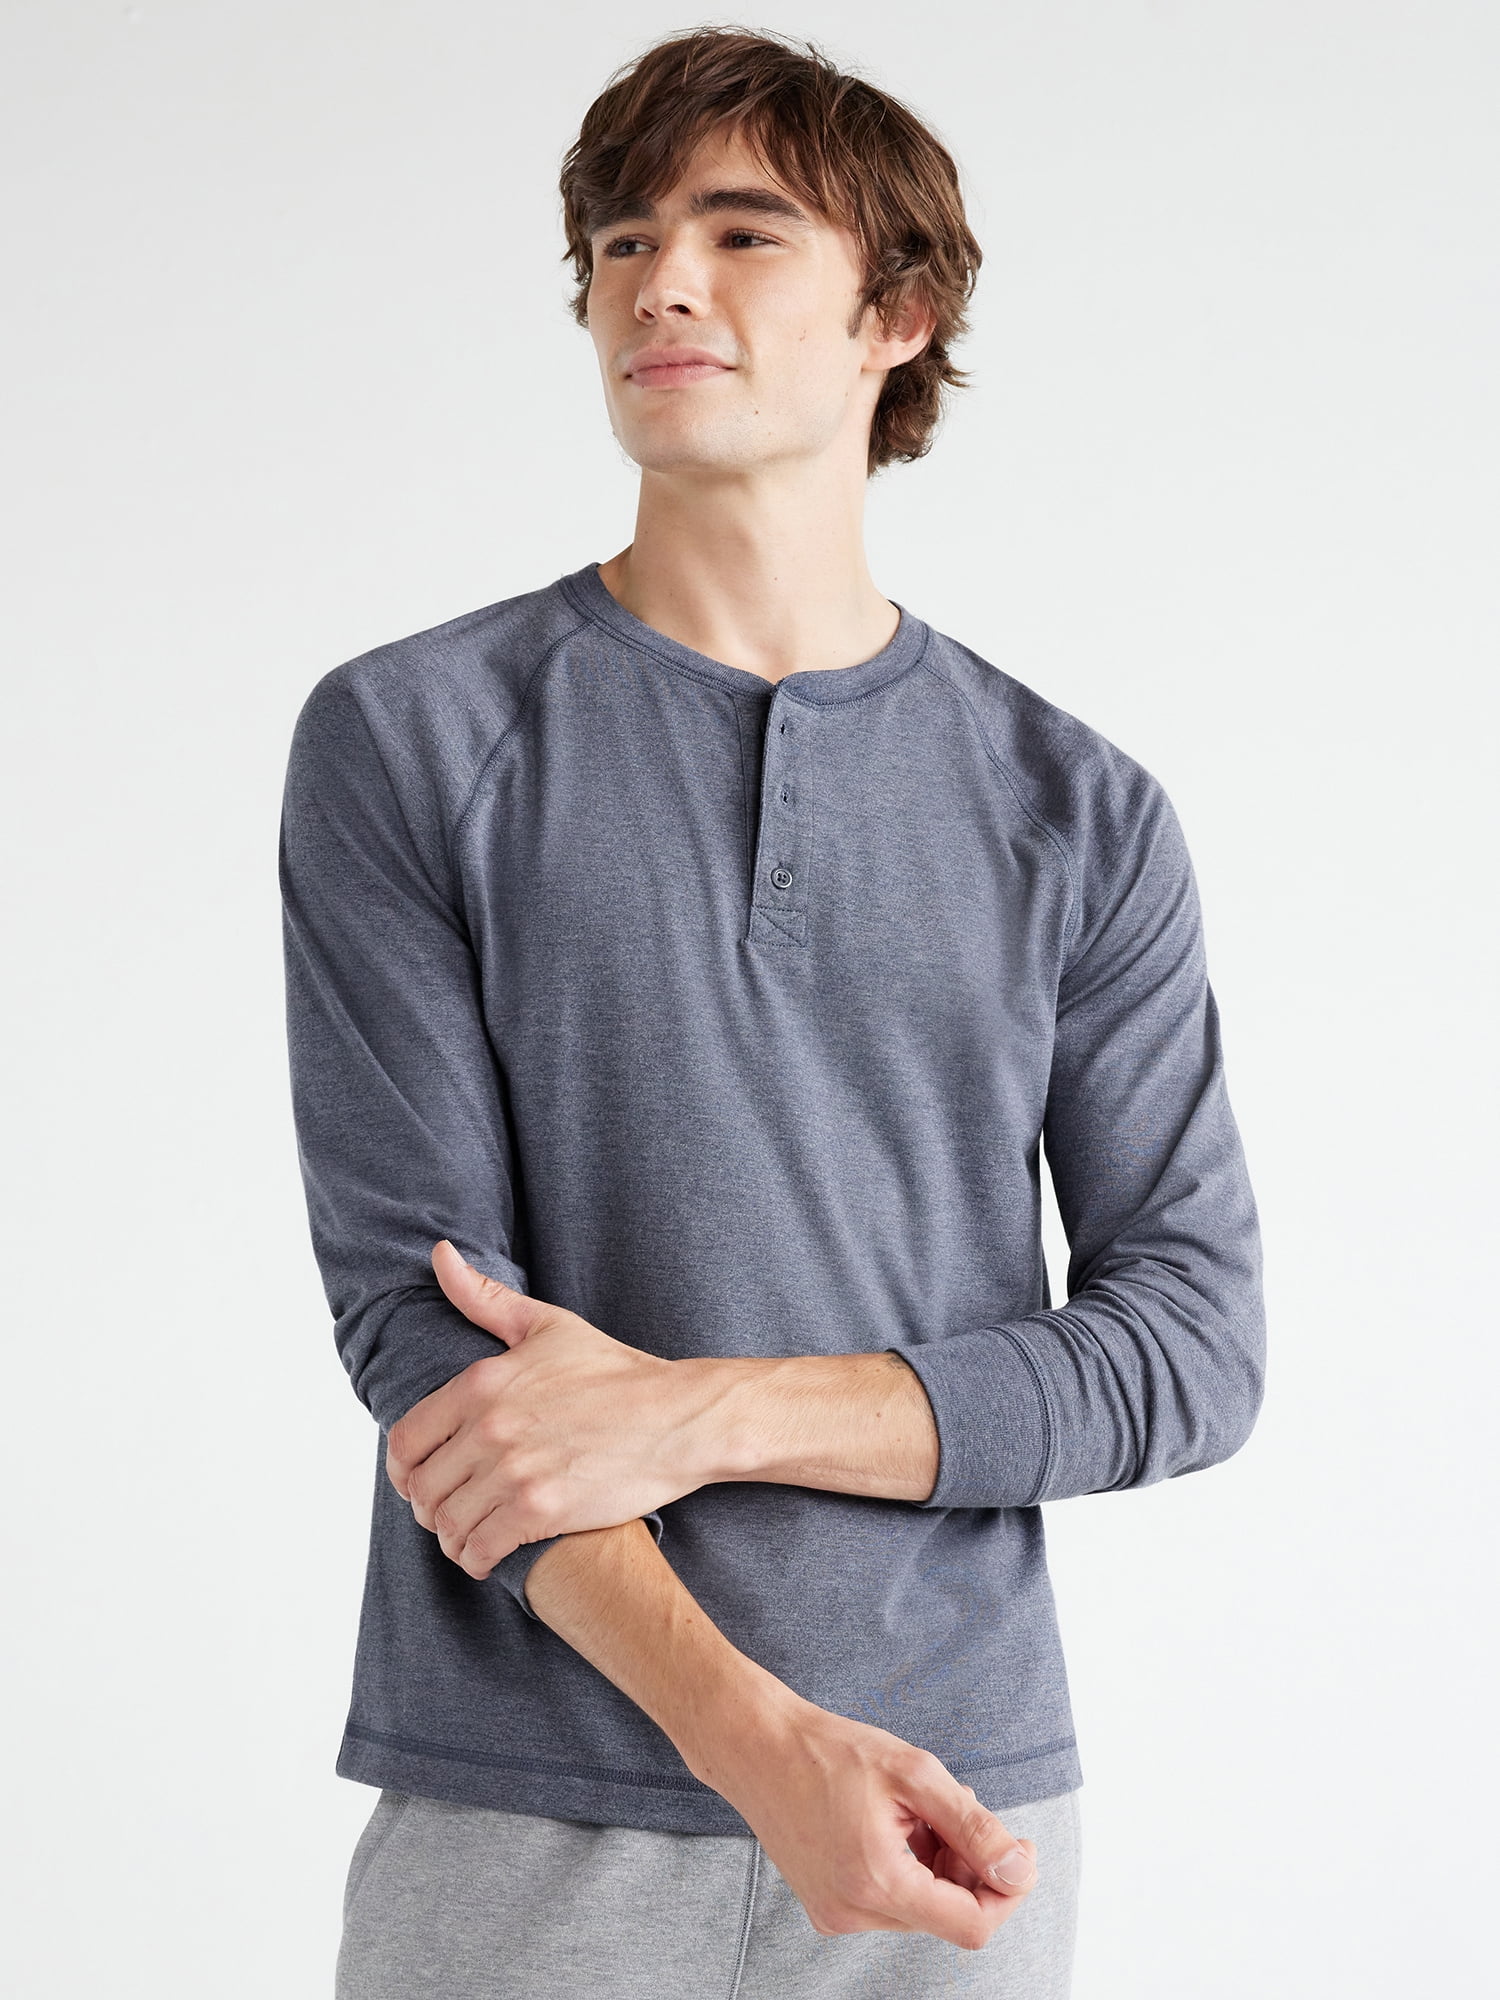 Free Assembly Men's Cozy Raglan Henley Shirt with Long Sleeves, Sizes ...